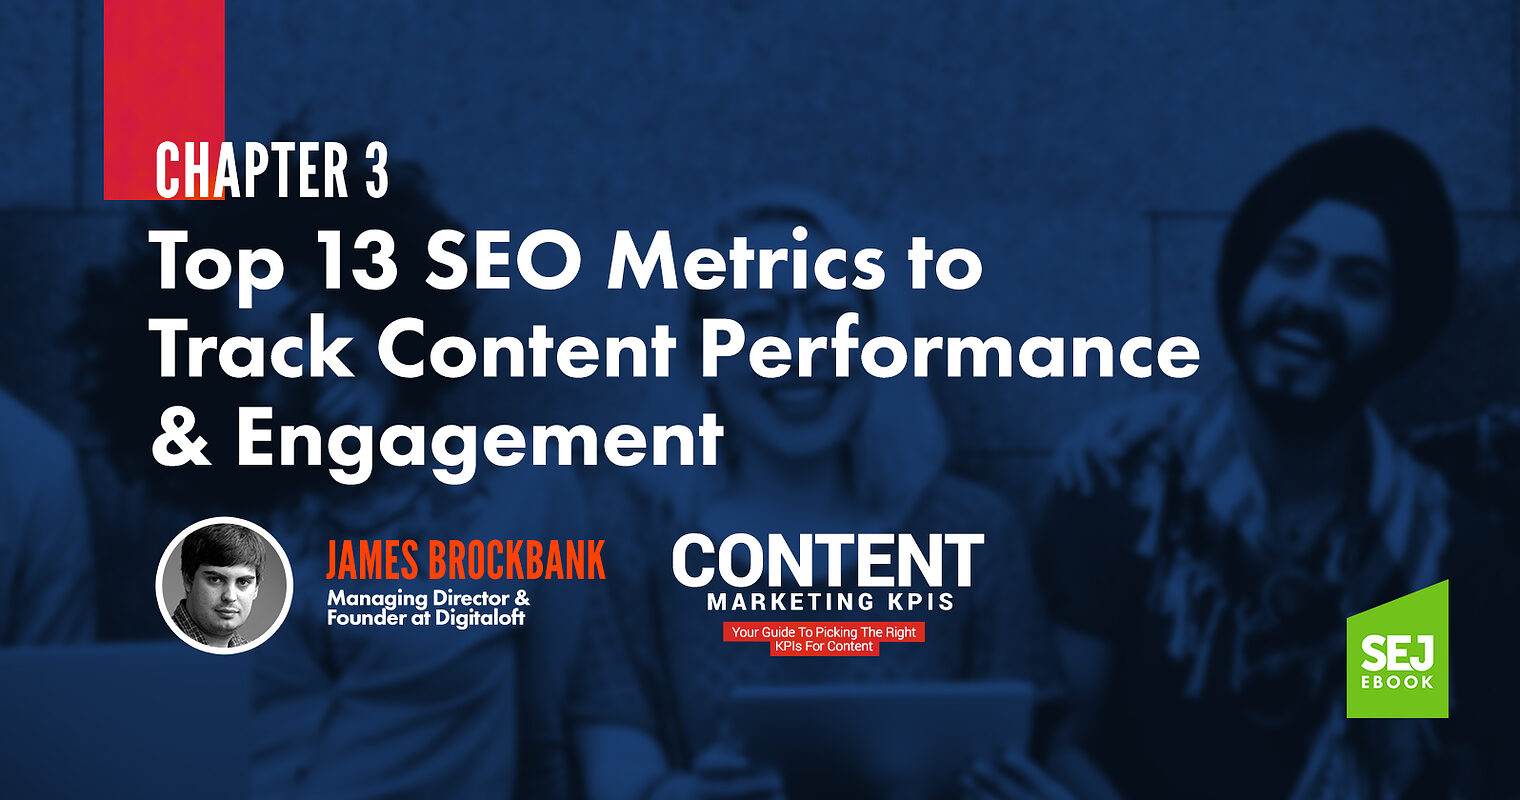 Top 13 SEO Metrics to Track Content Performance & Engagement